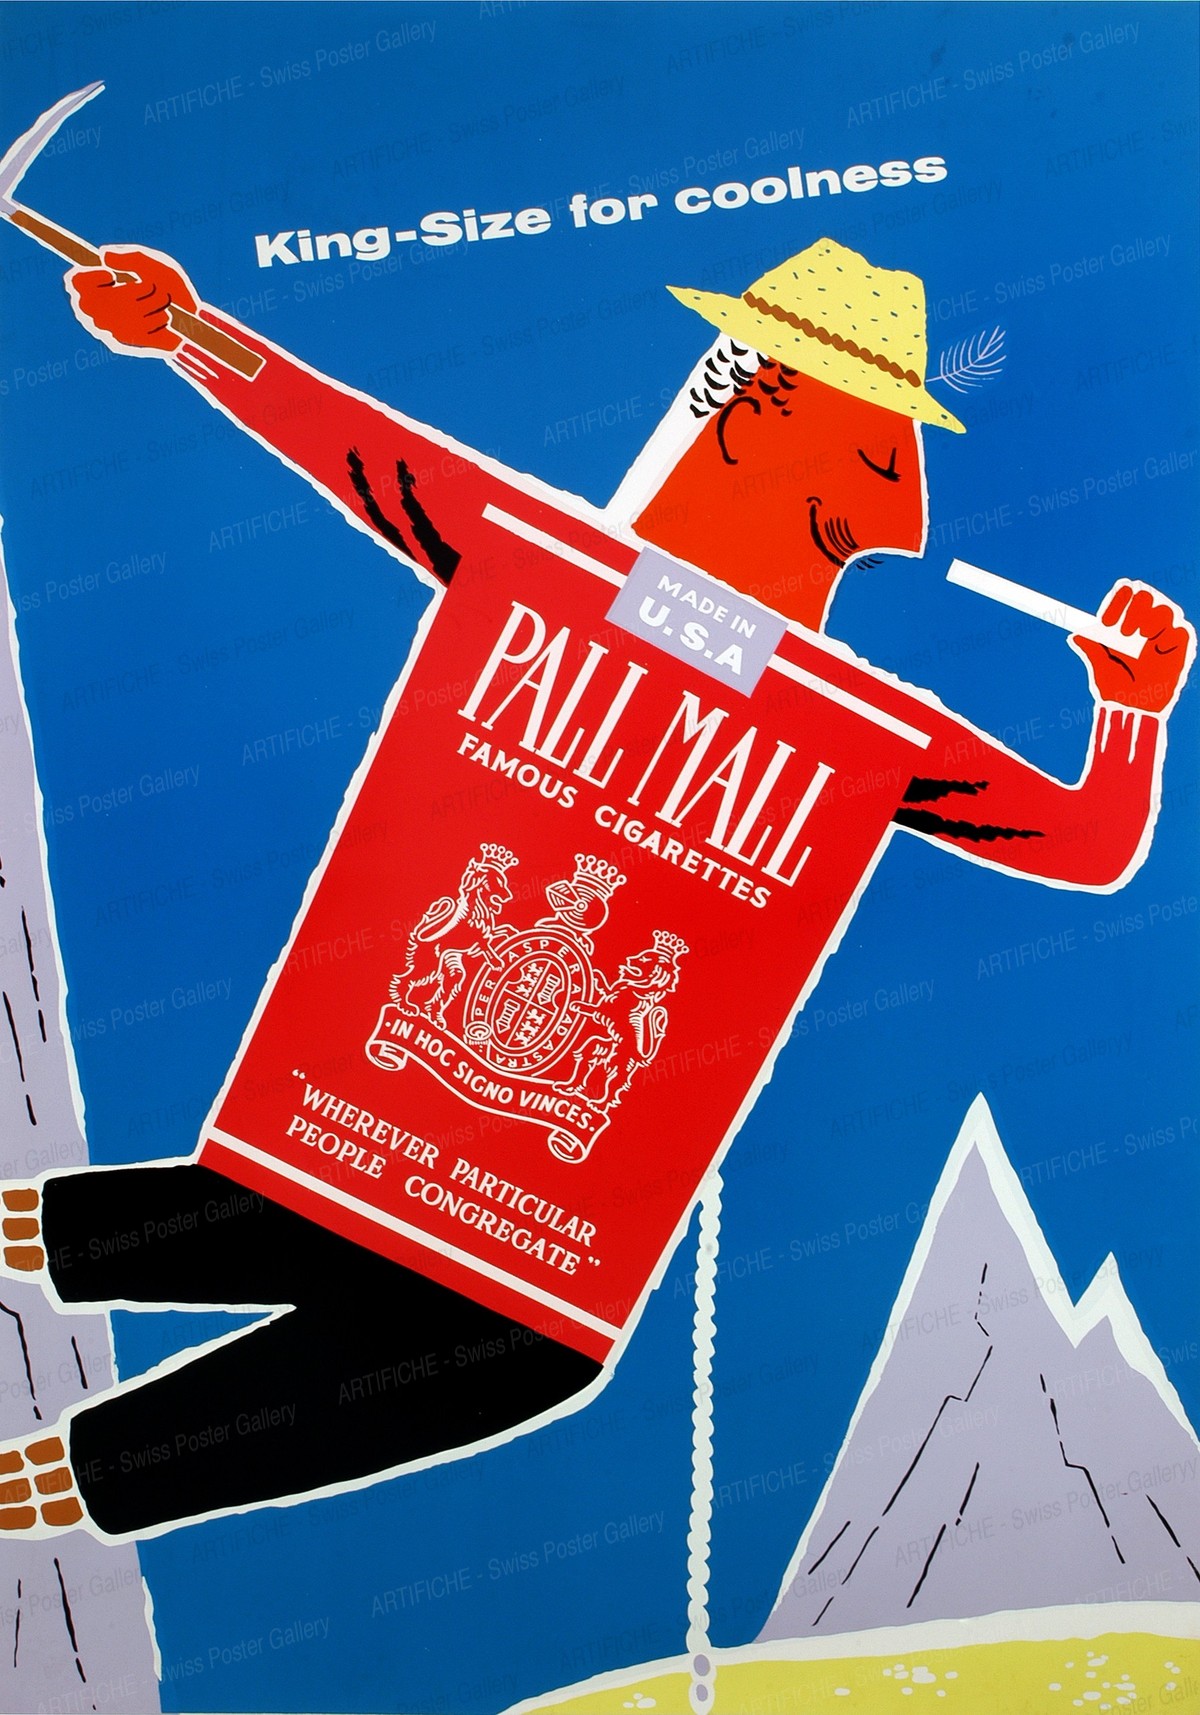 PALL MALL – King Size for coolness – made in USA, Daphne Padden